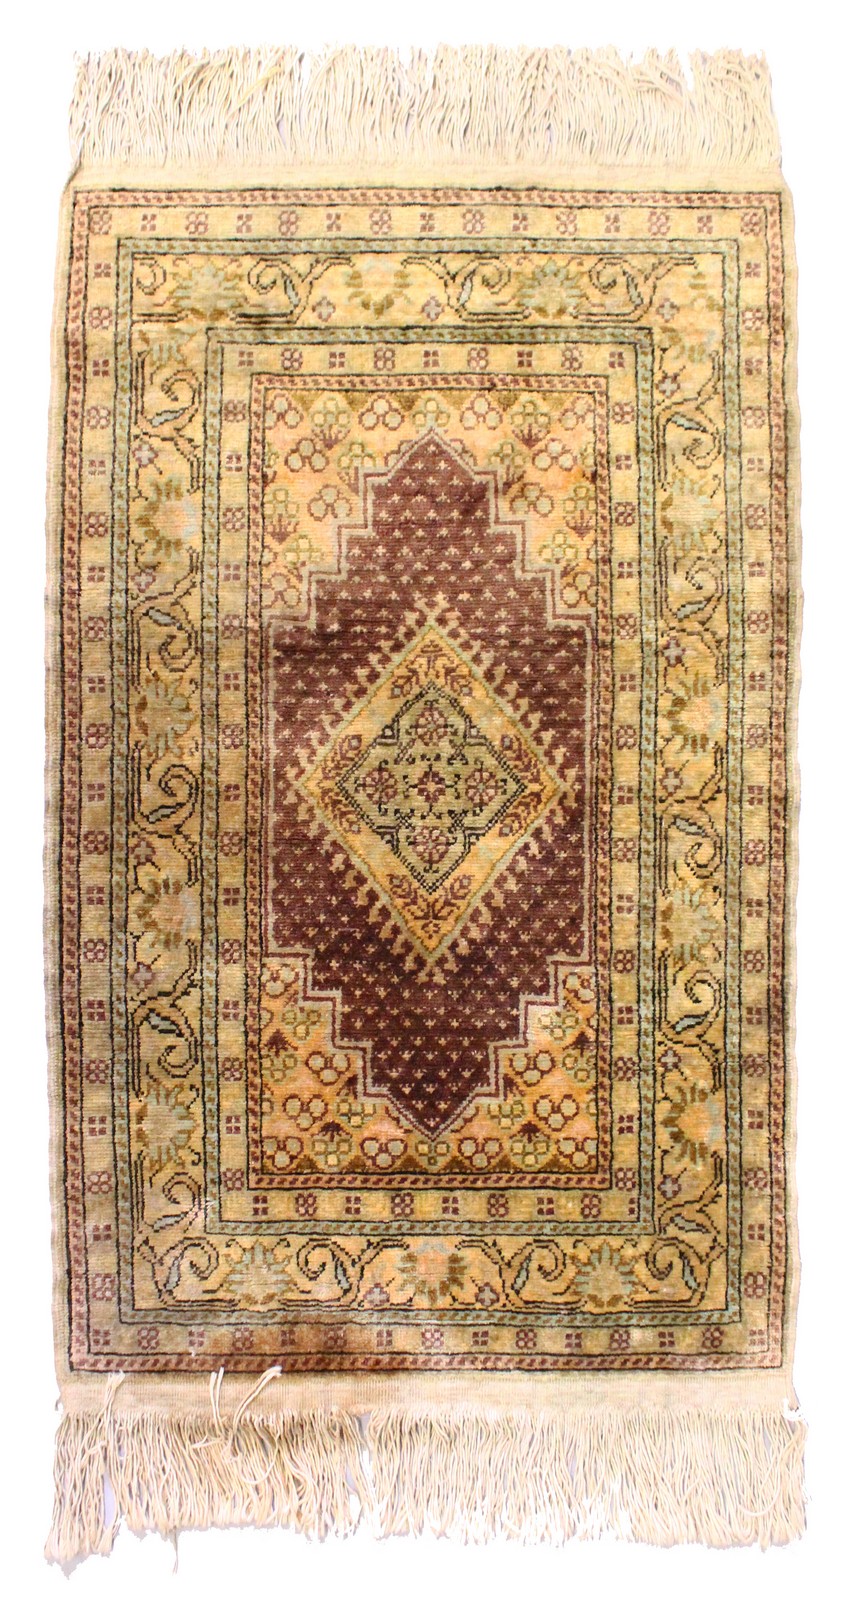 A SILKY WOOL PERSIAN RUG with central motif. 3ft 6ins long x 2ft wide.